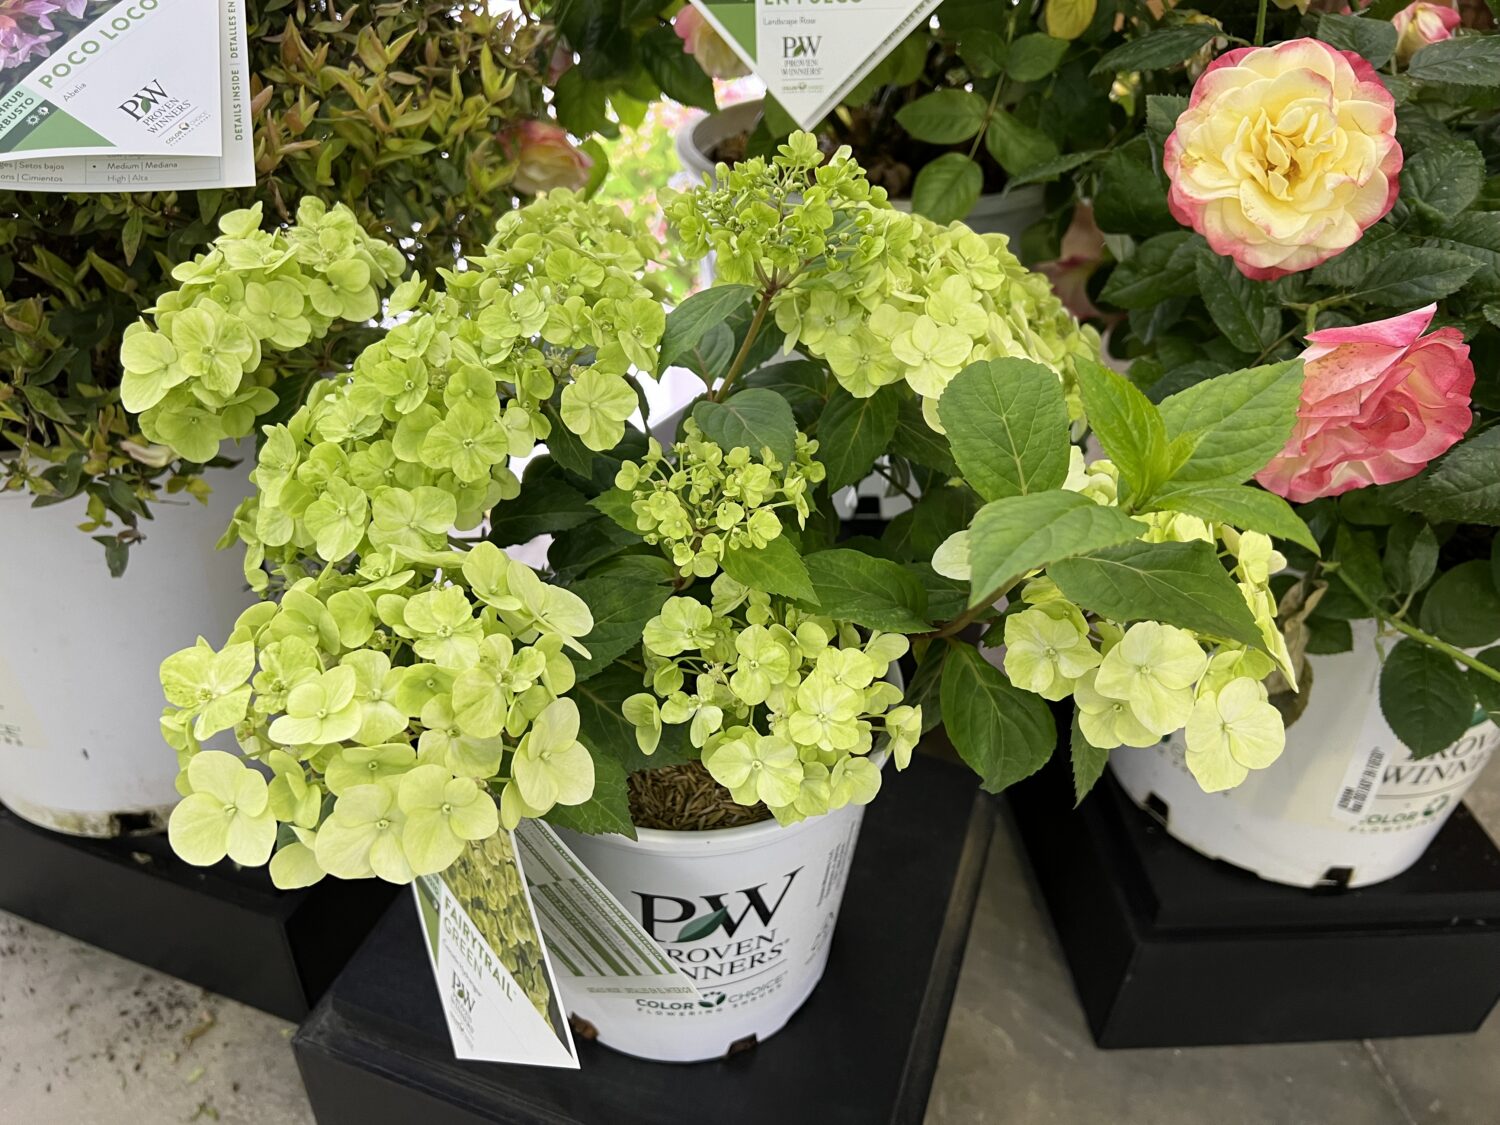 Proven Winners ColorChoice is expanding its line of Cascade hydrangea to include two new varieties: 'Fairytrail Green' and 'Fairytrail White'.